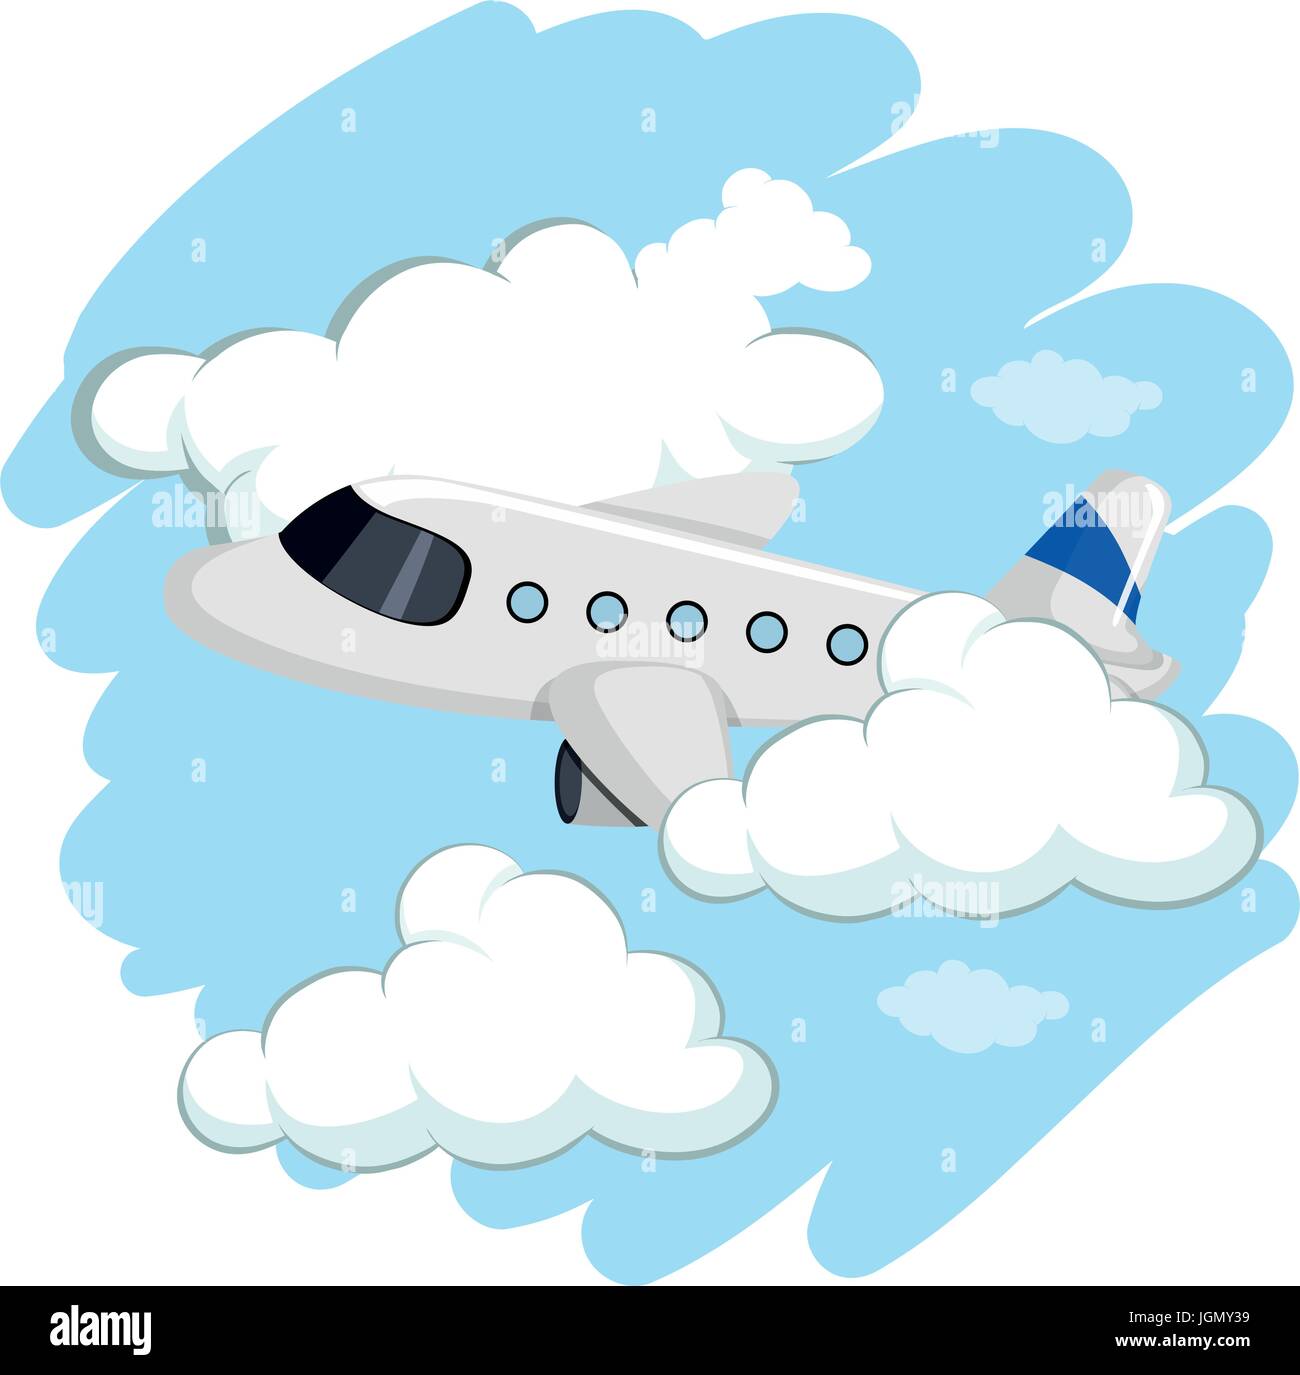 Airplane flying high in sky illustration Stock Vector